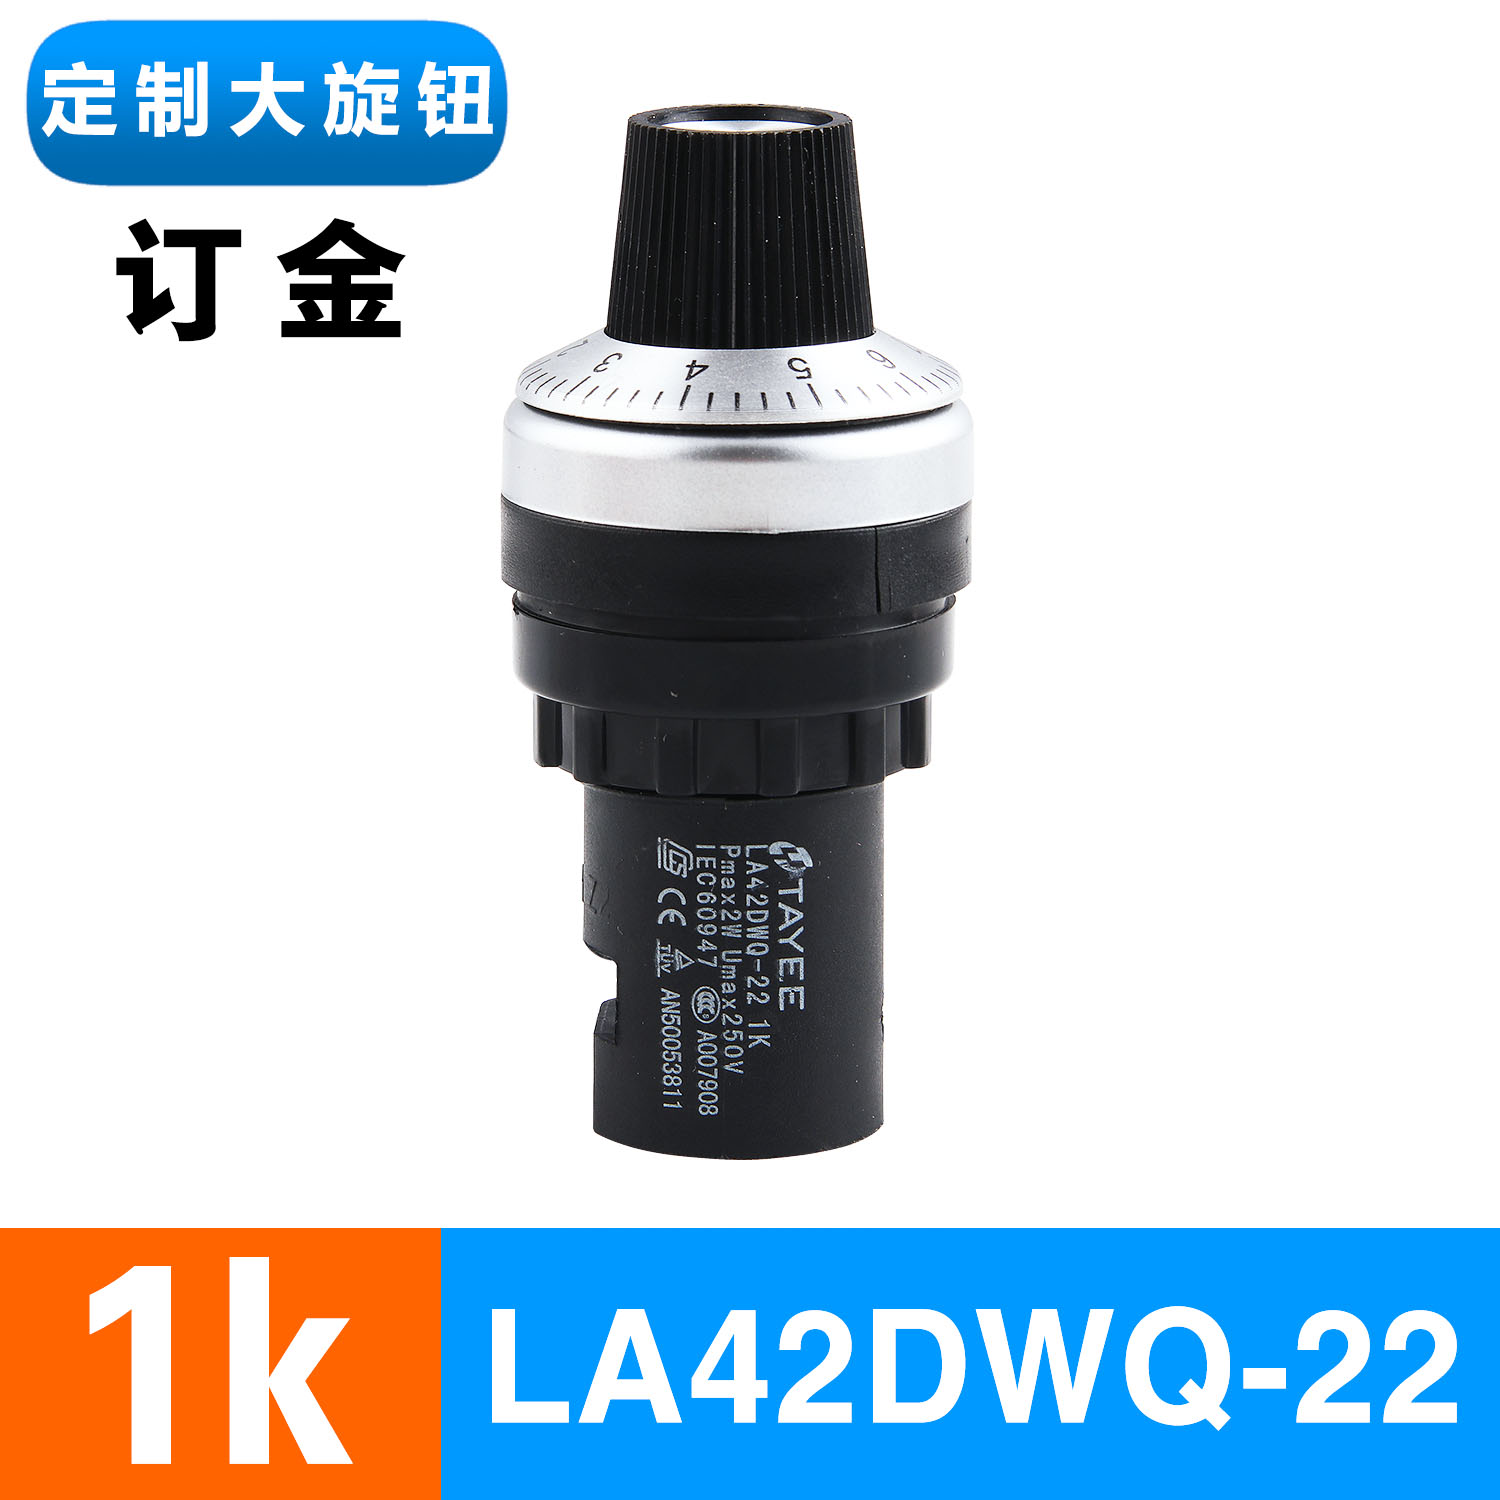 Custom button 1Kquality goods Shanghai Tianyi Frequency converter adjust speed potentiometer precise LA42DWQ-22 governor 22mm5K10K